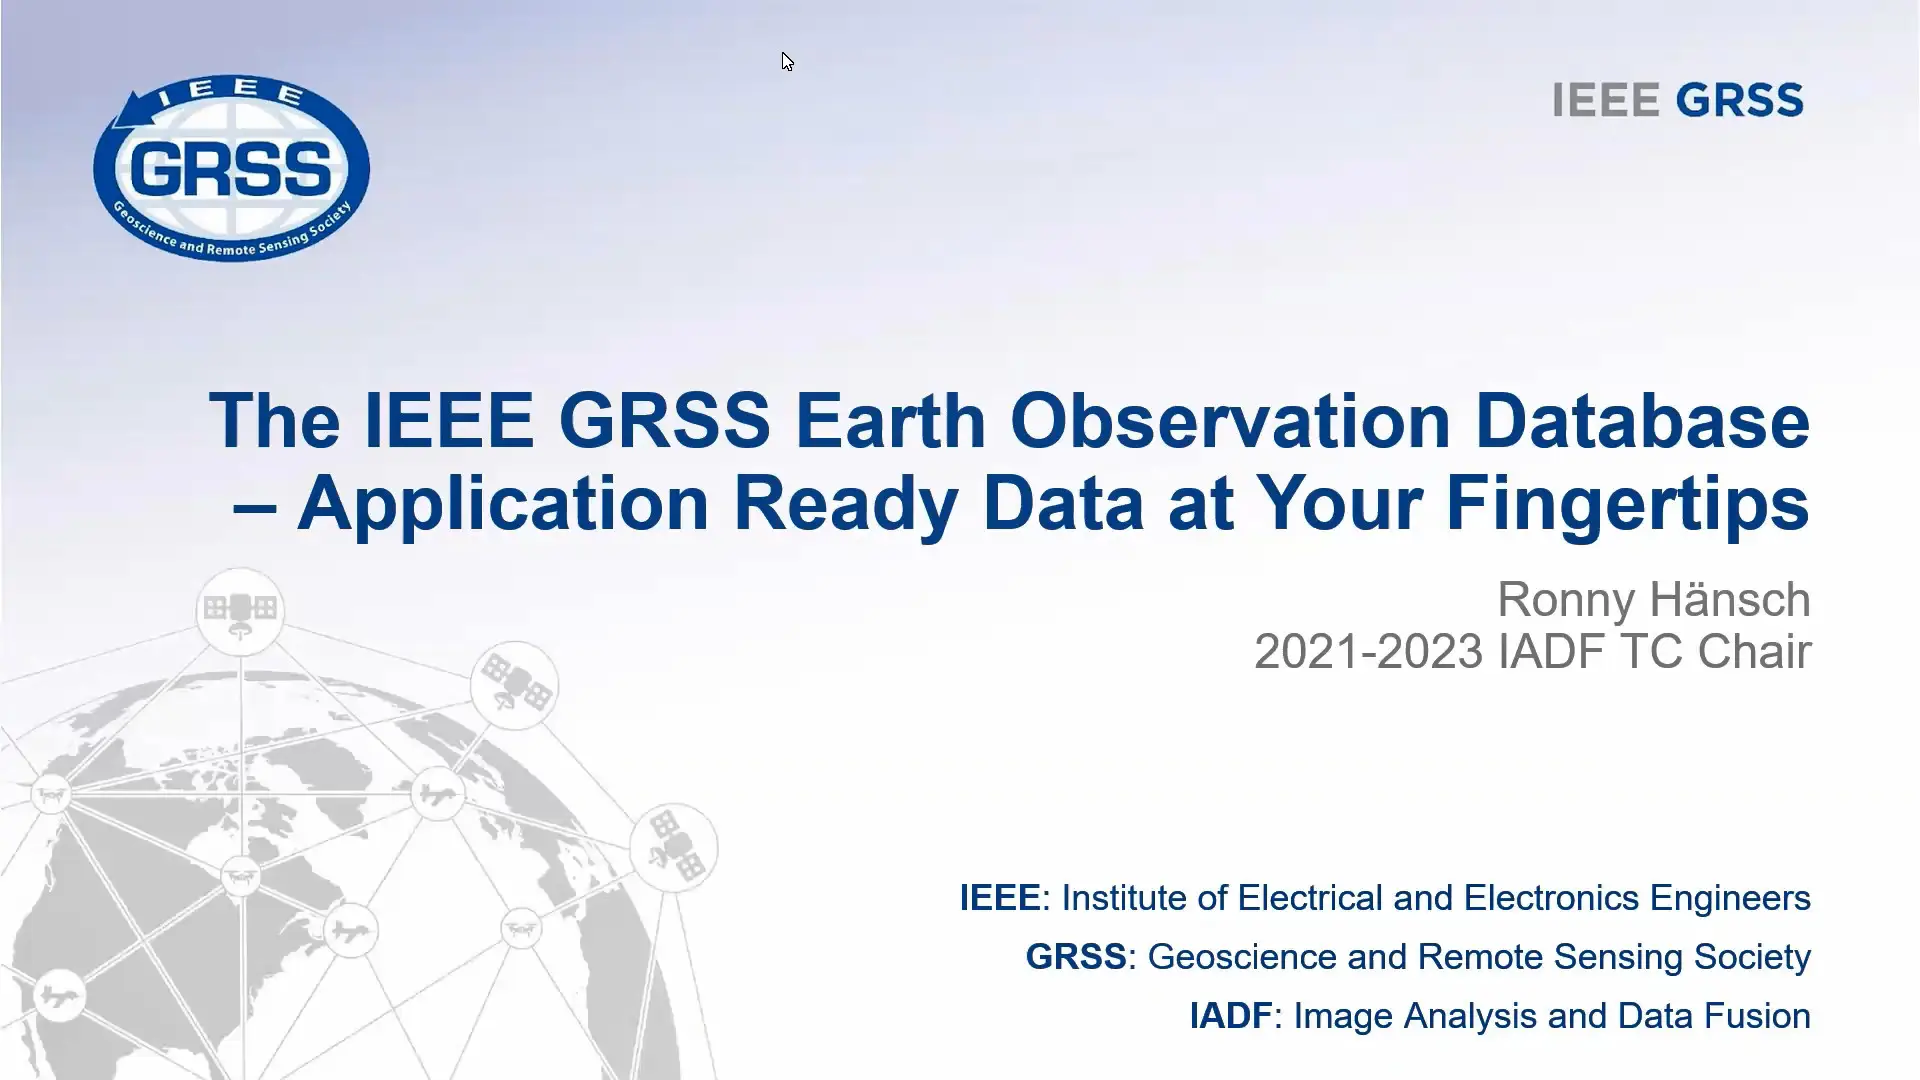 IEEE OFCCT 2023: Keynote 3.4: The IEEE GRSS Earth Observation Database - Application Ready Data at Your Fingertips